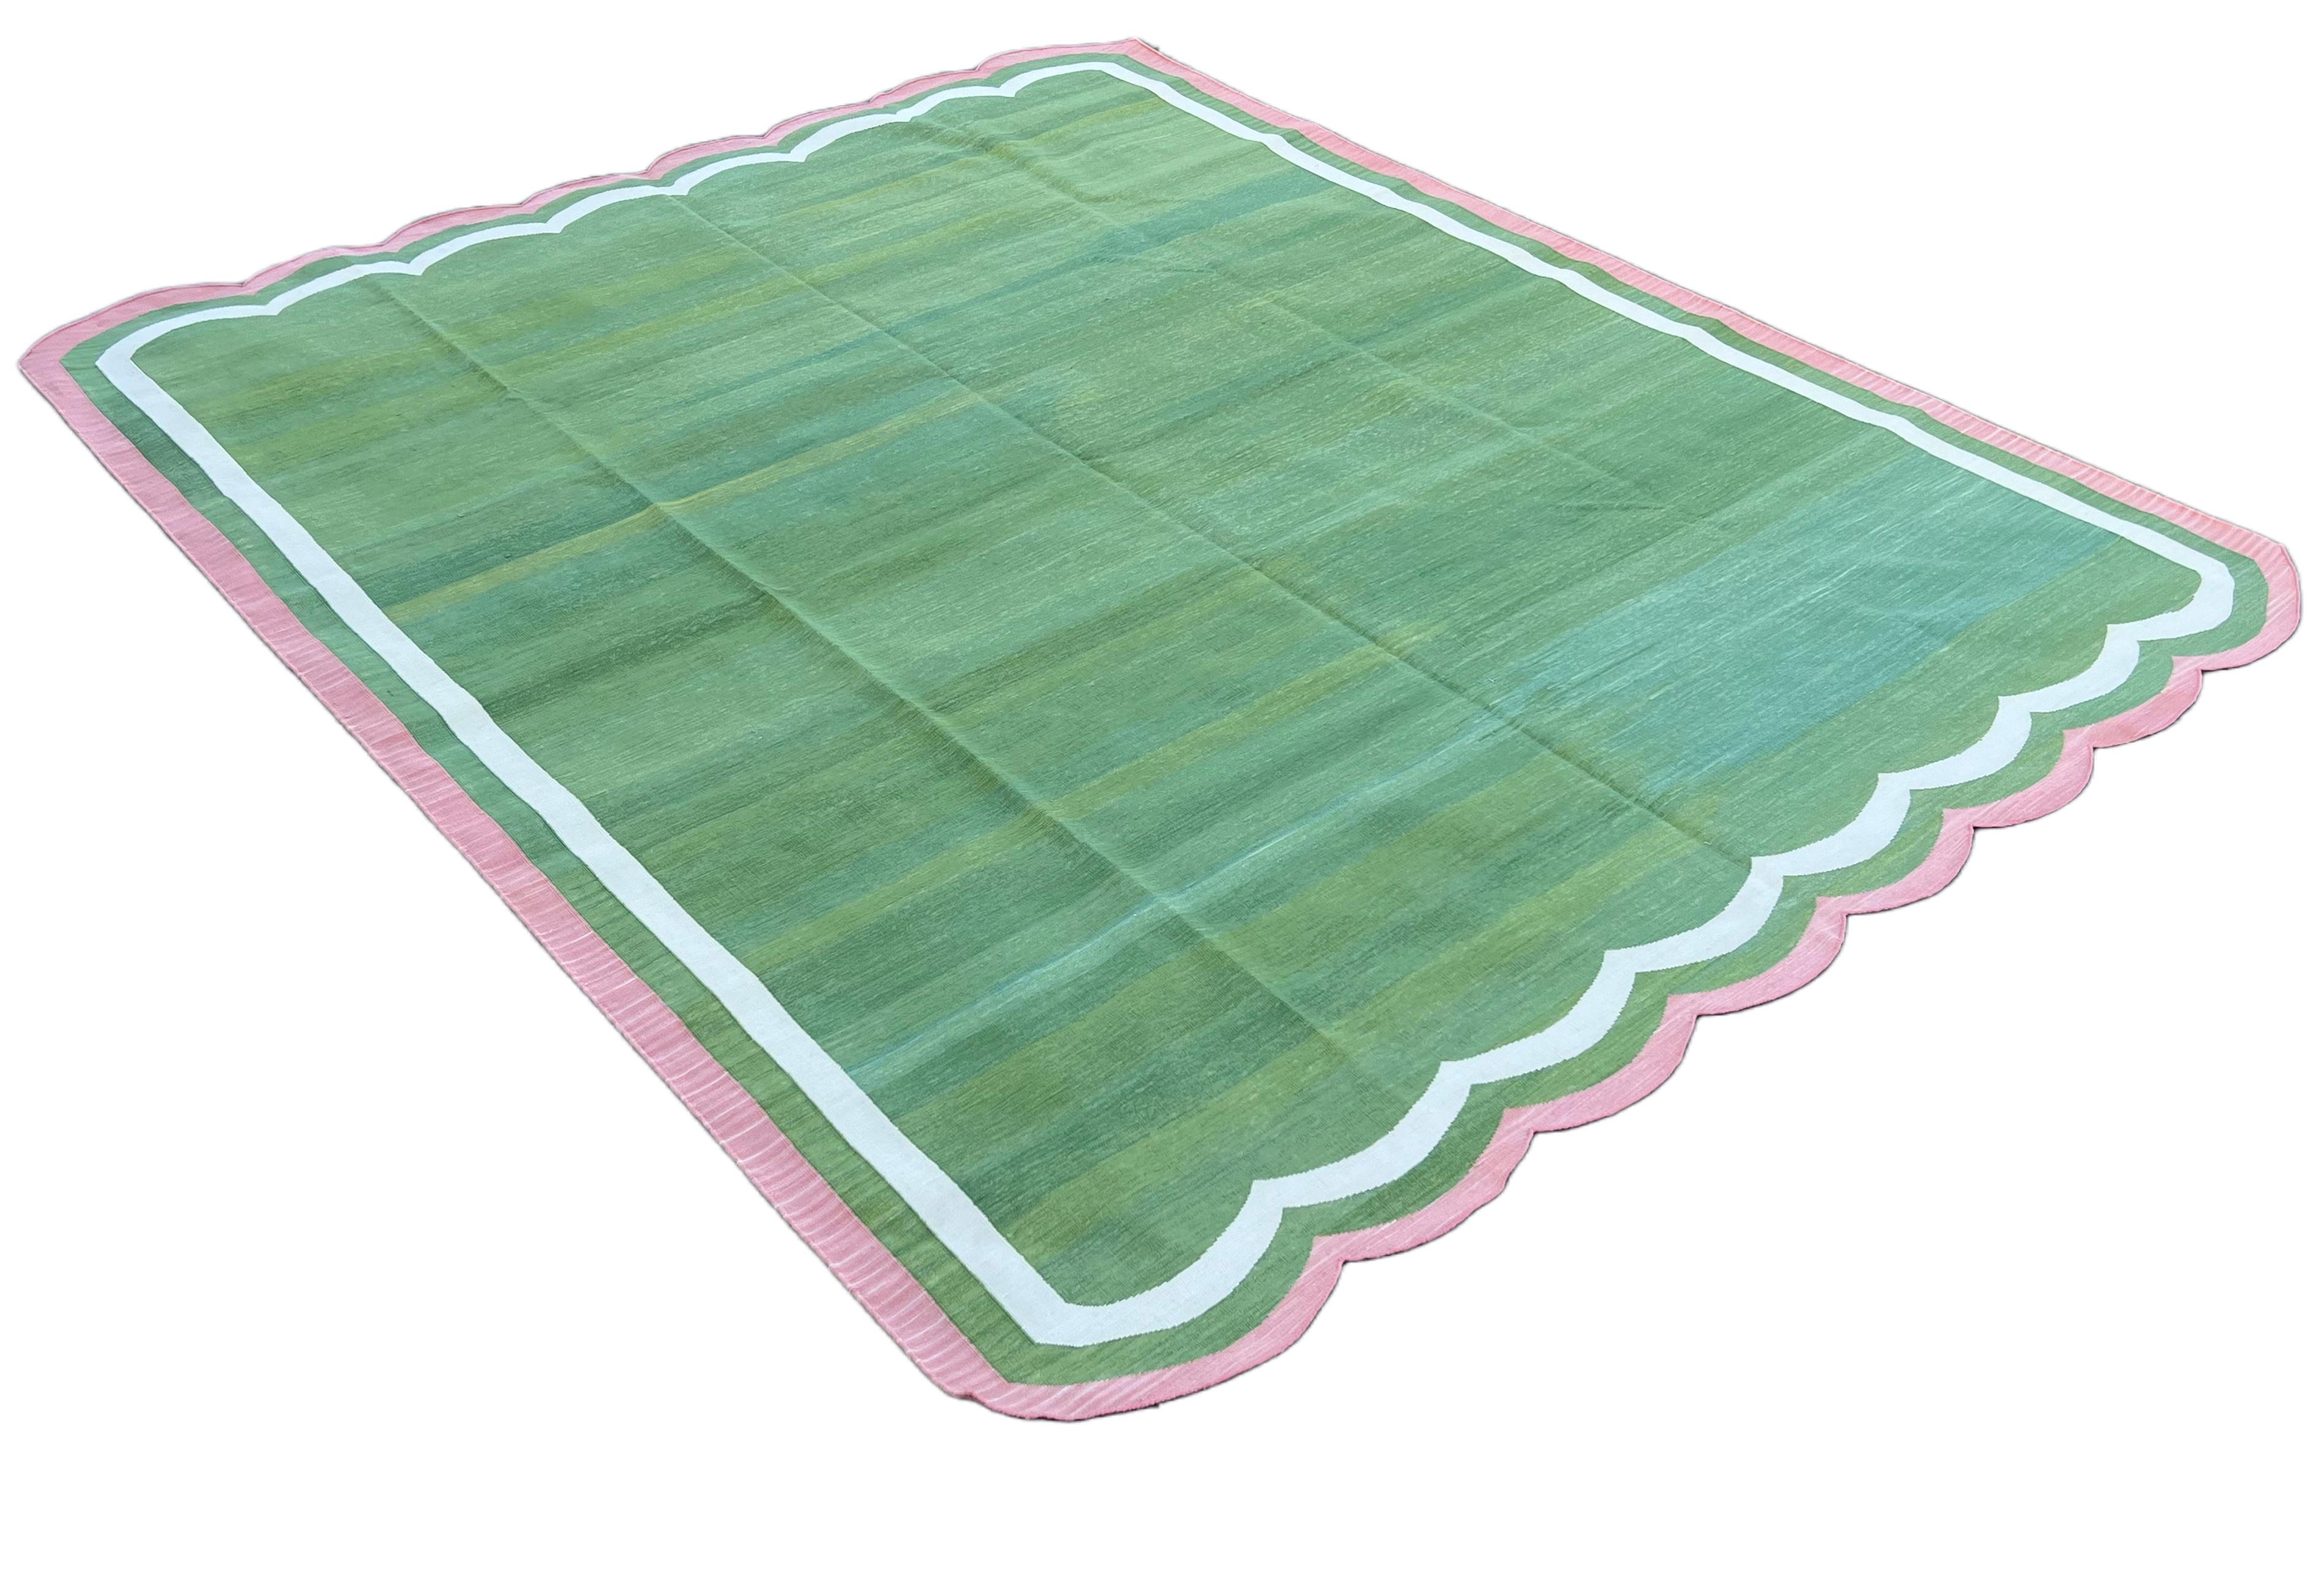 Handmade Cotton Area Flat Weave Rug, 8x10 Green And Pink Scallop Striped Dhurrie For Sale 4